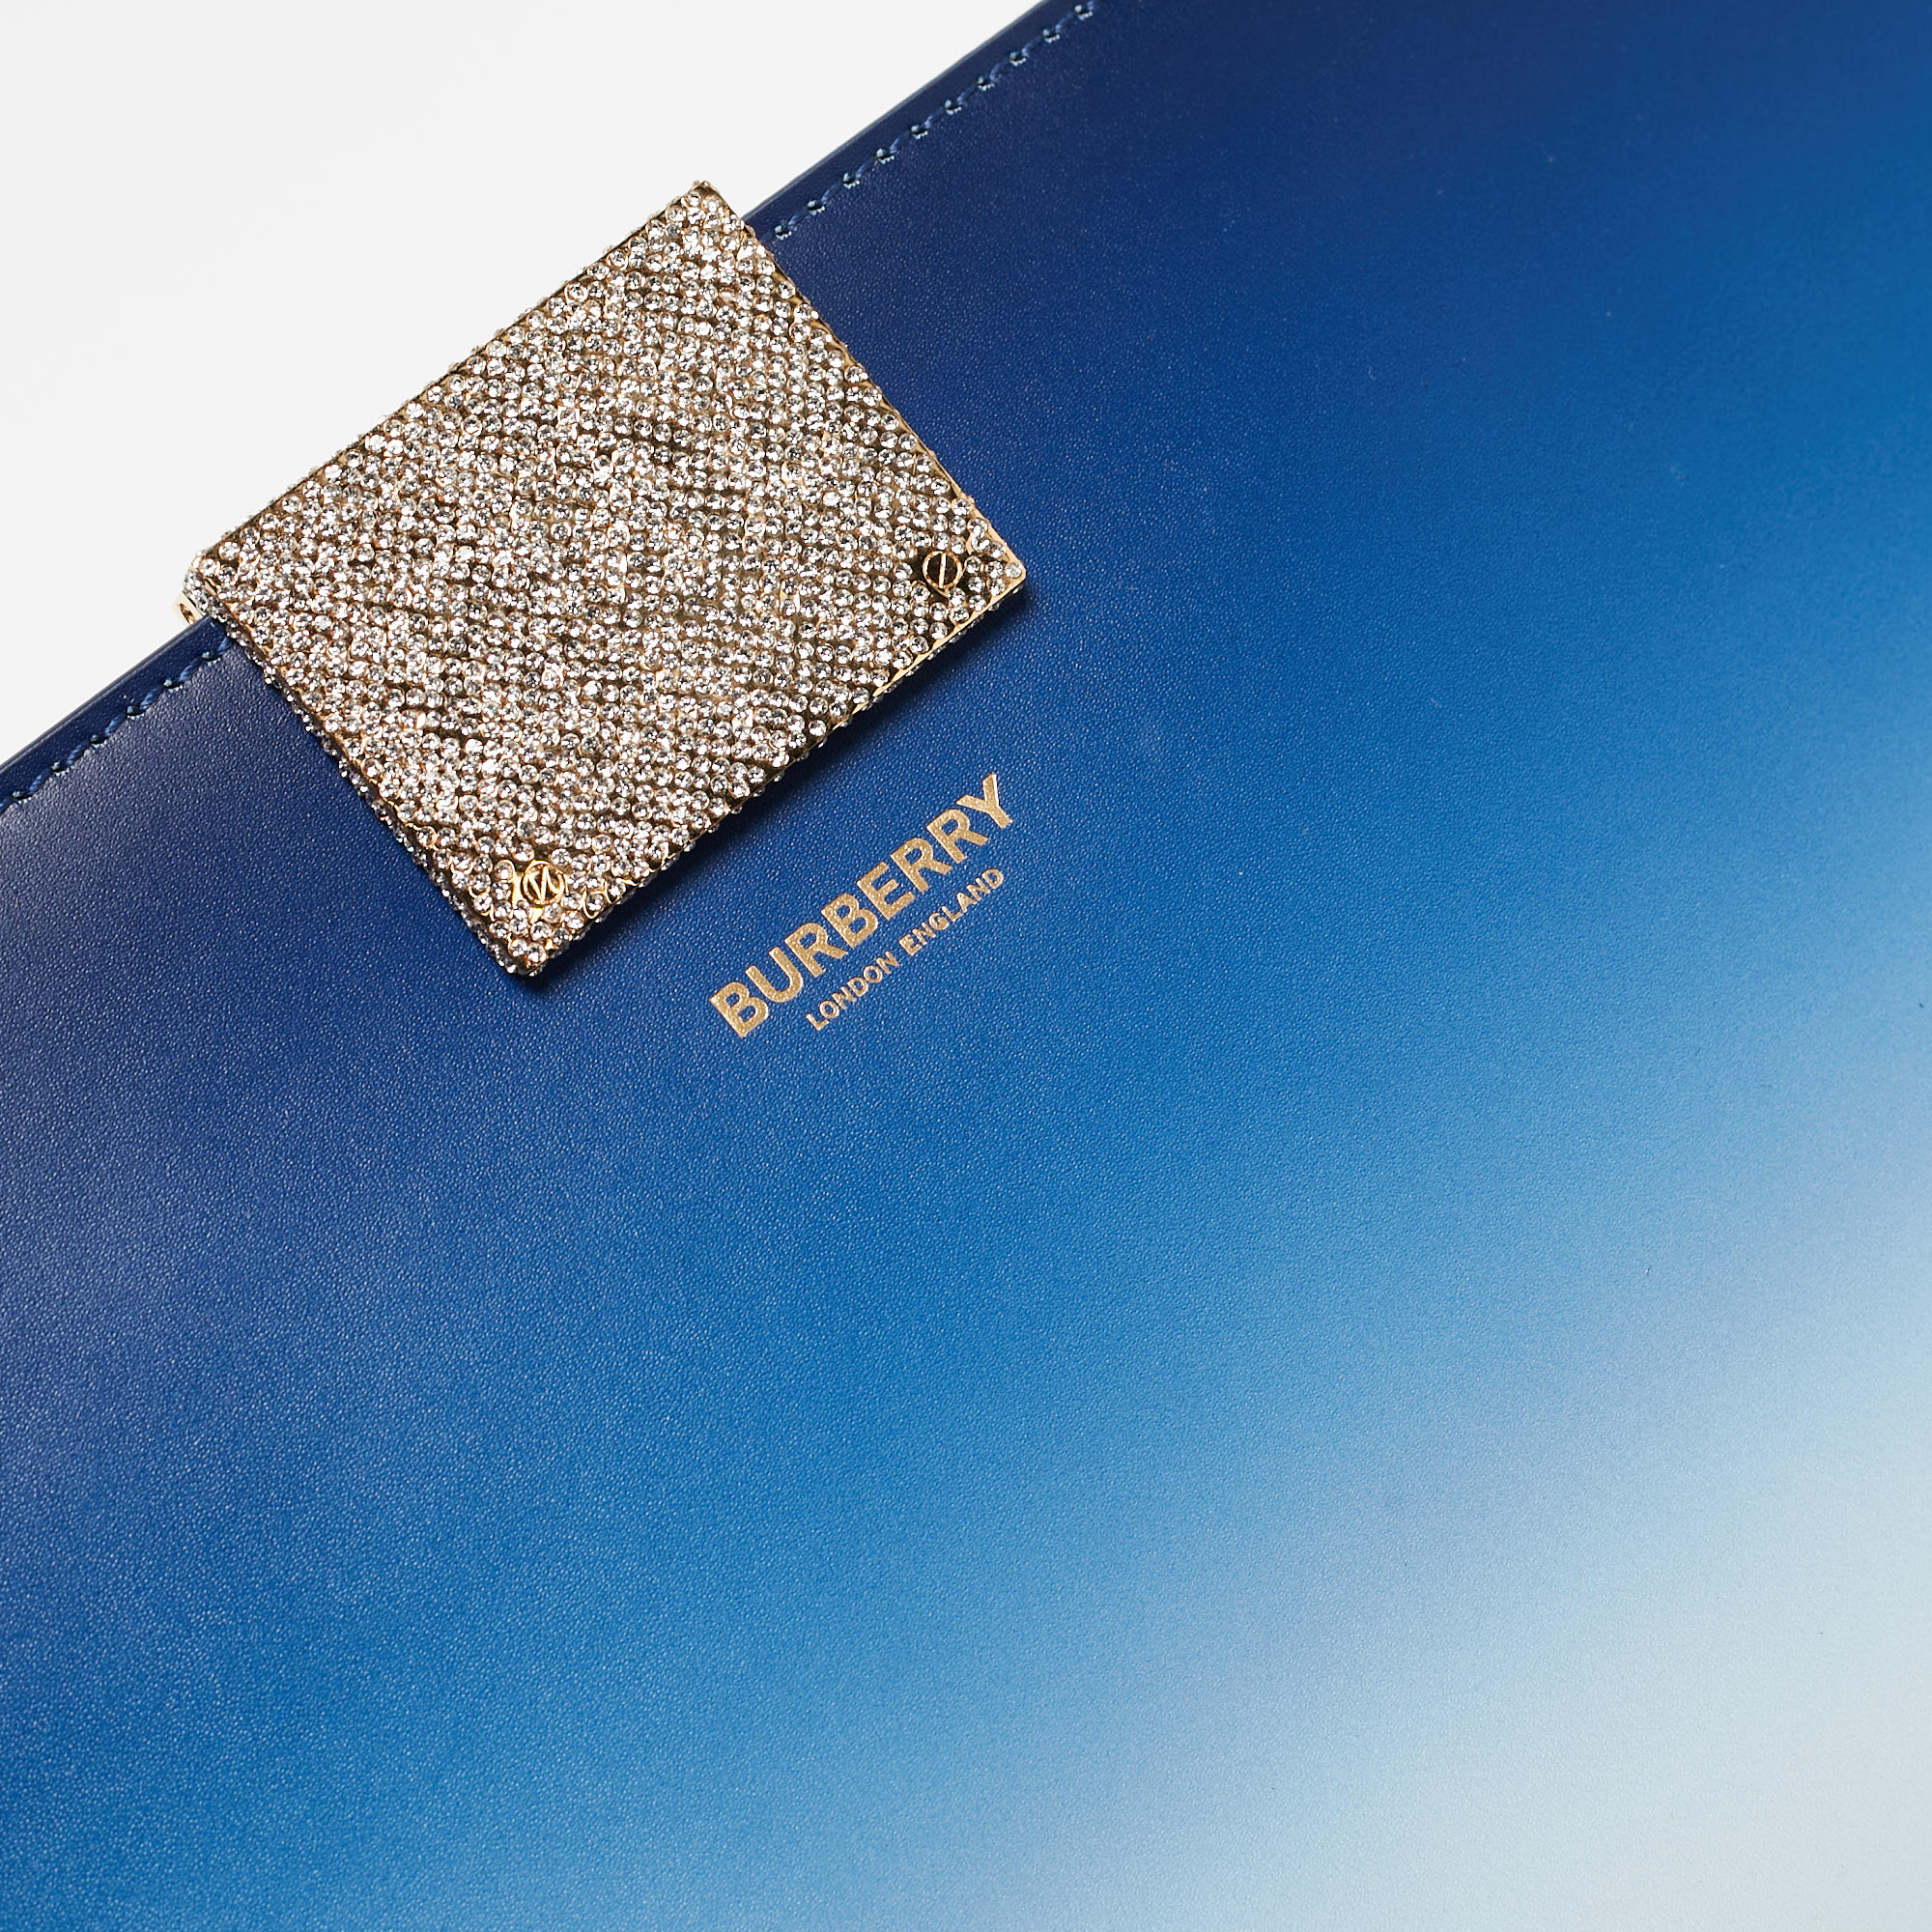 Burberry Ombre Blue Leather Crystal Olympia Clutch